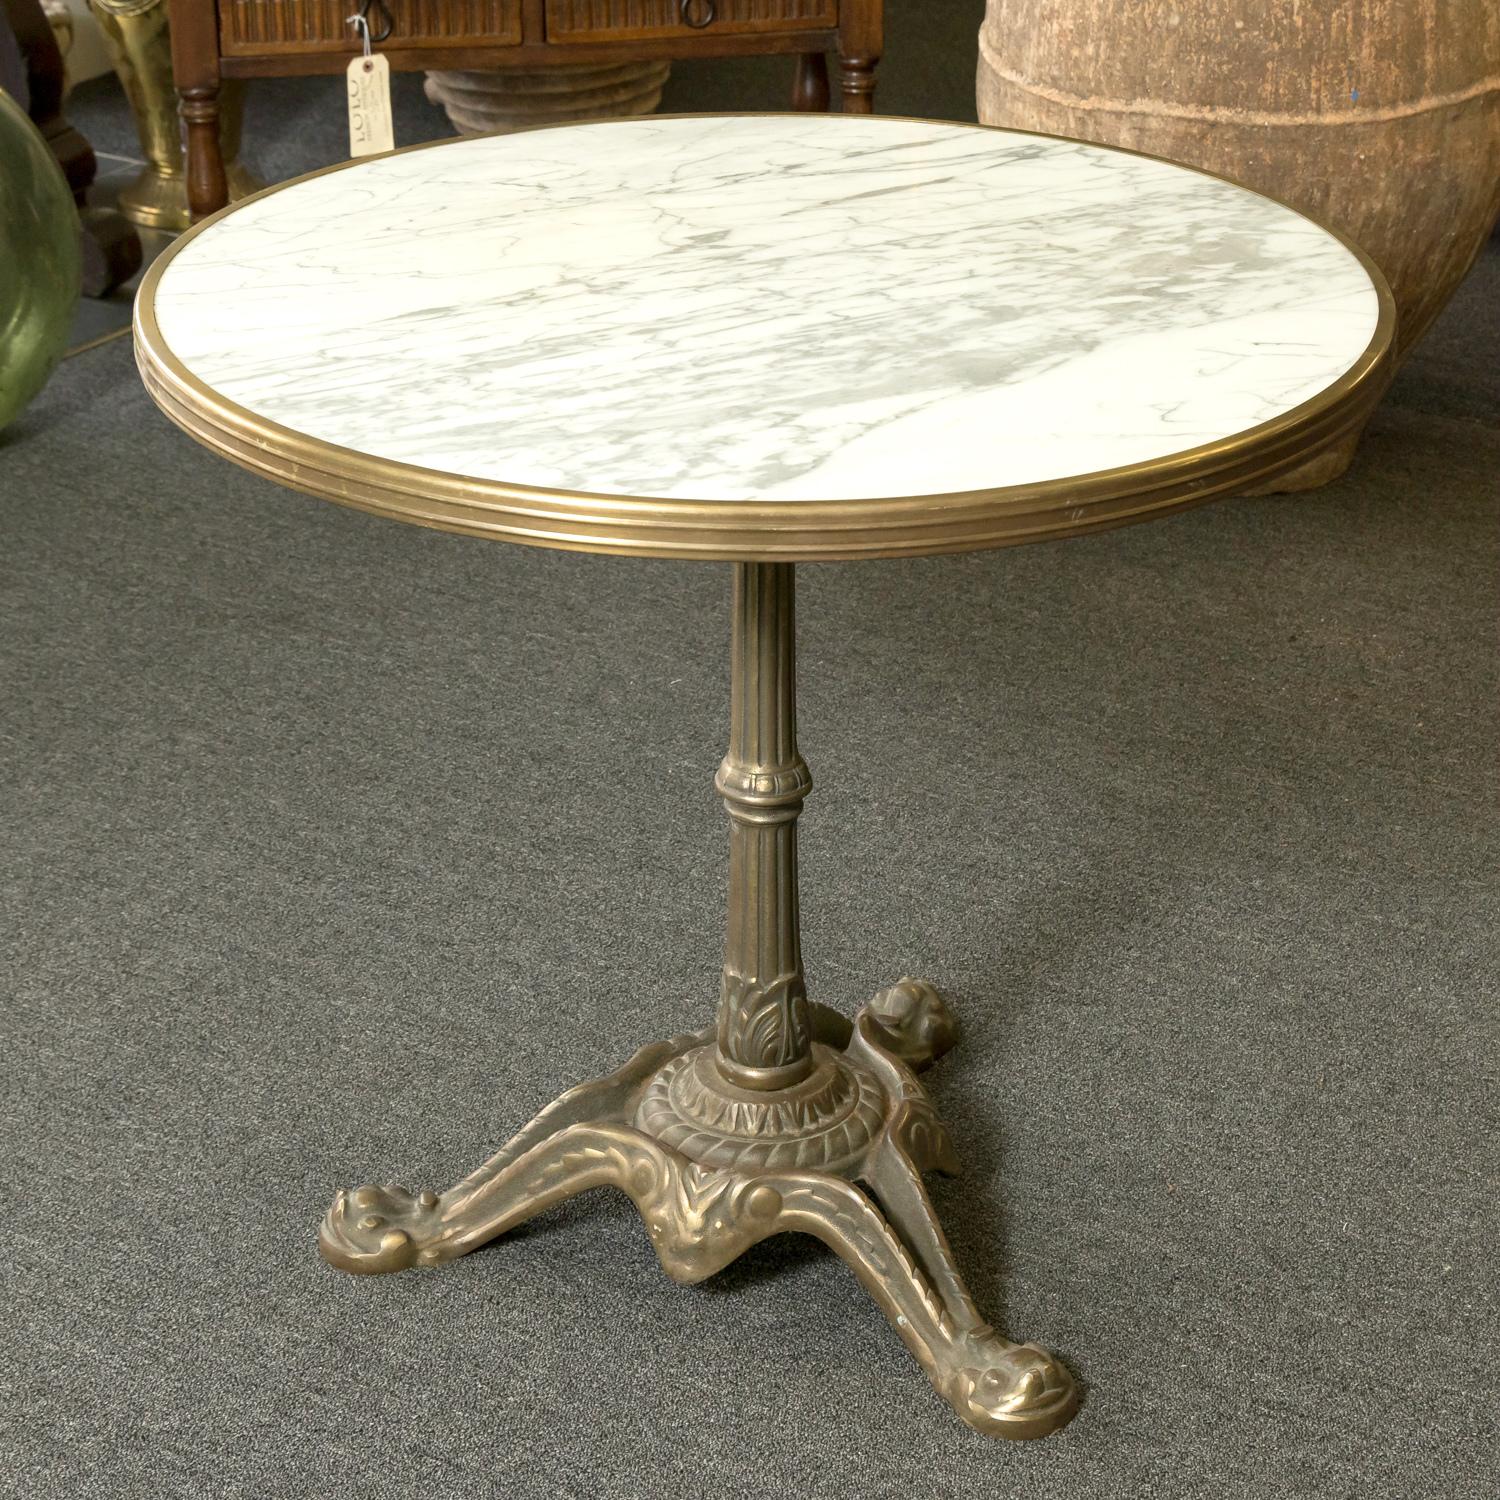 A beautiful and rare large 19th century French Parisian bistro or cafe table, having the original classic white marble top with brass surround, circa 1890s. Raised on a fluted bronze tripod base with an aged patina that only comes with age and